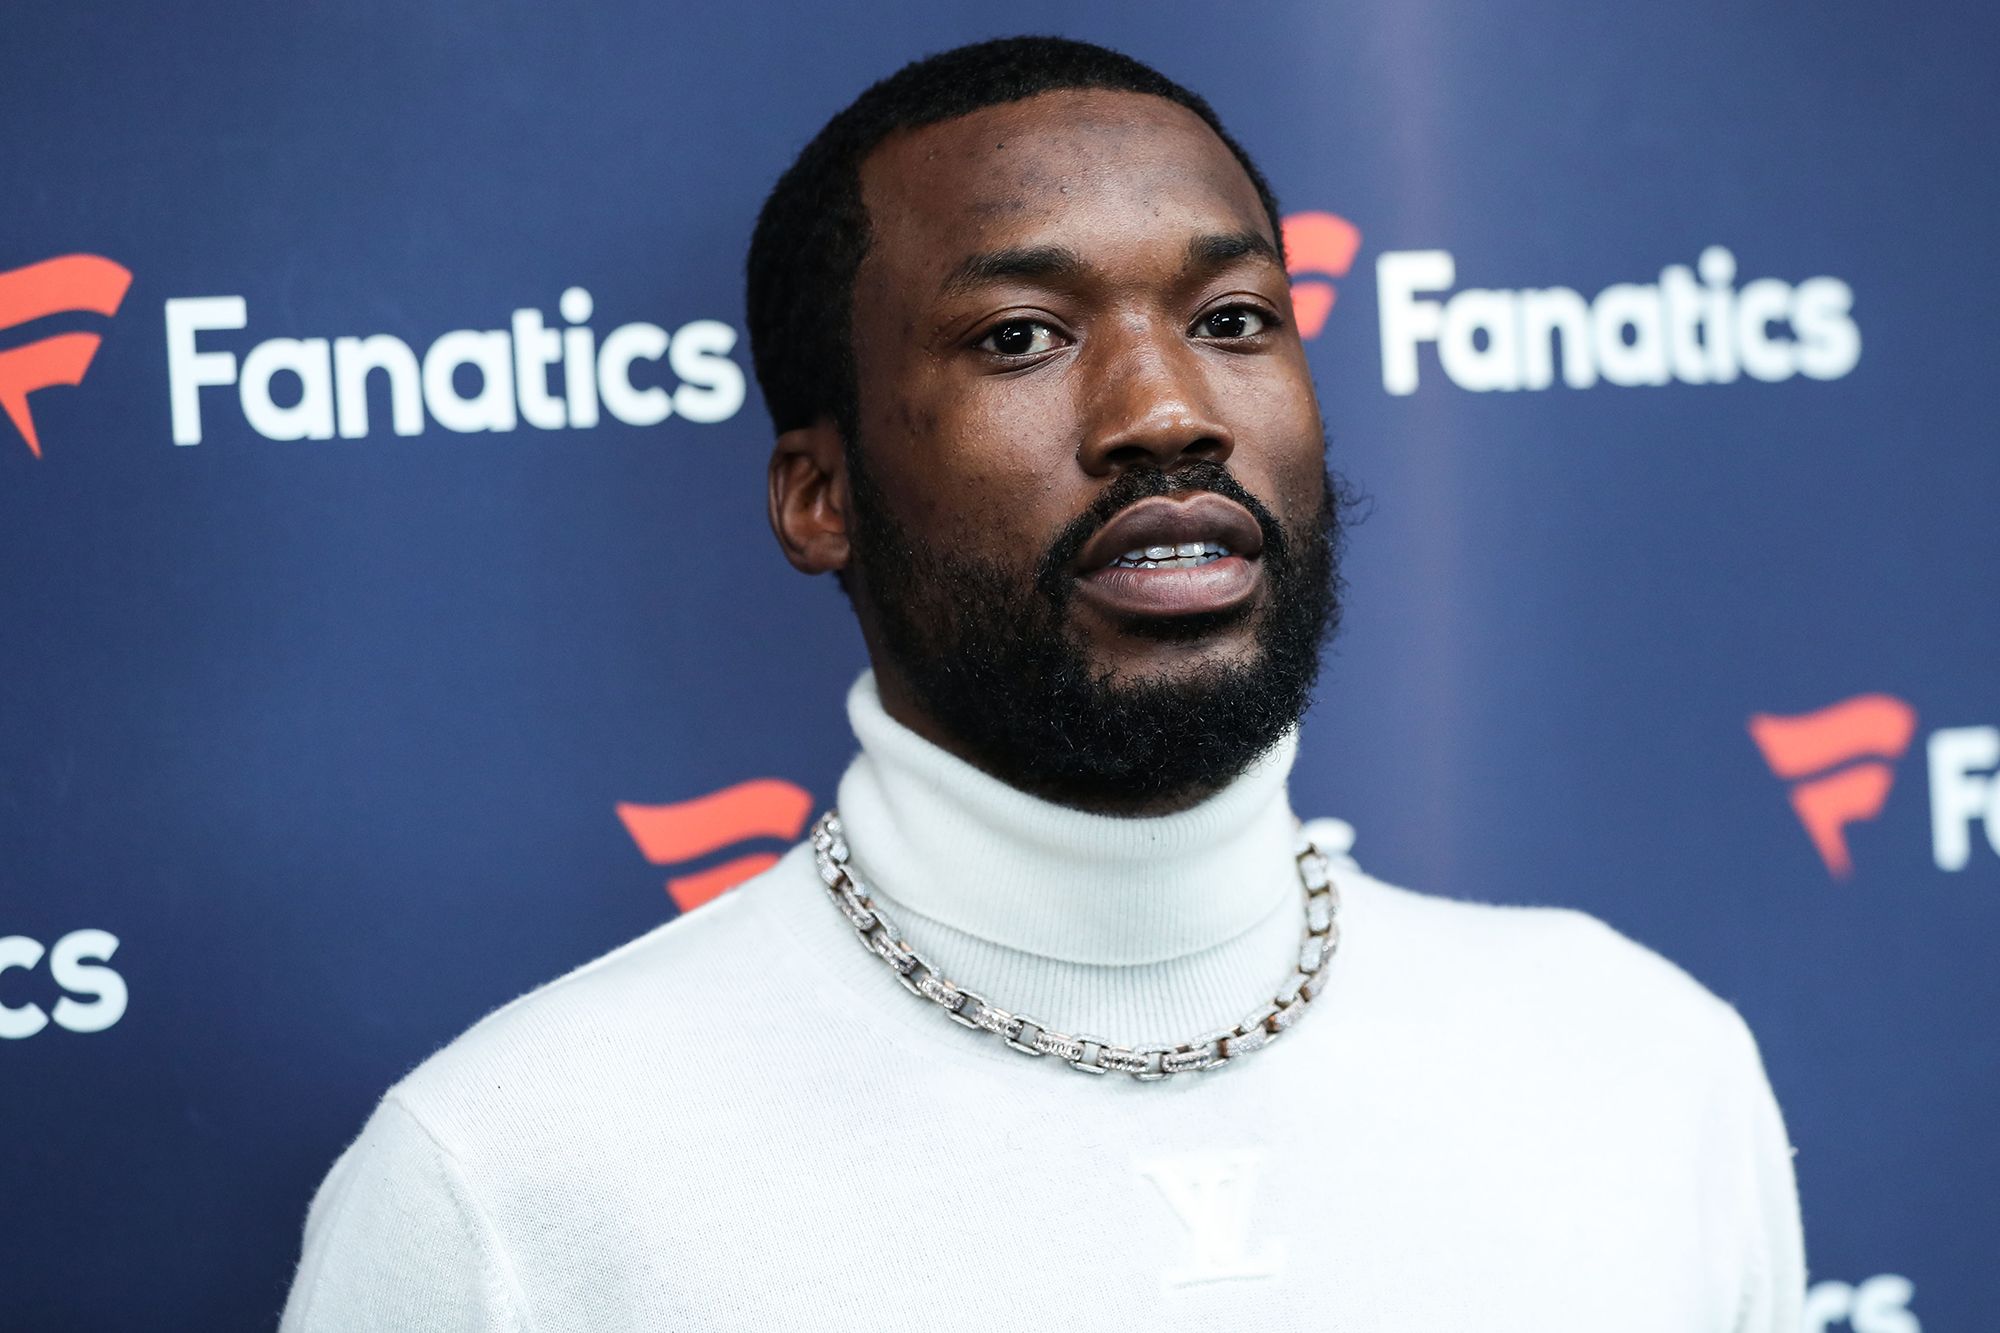 Meek Mill Returns With His First New Music Of 2022